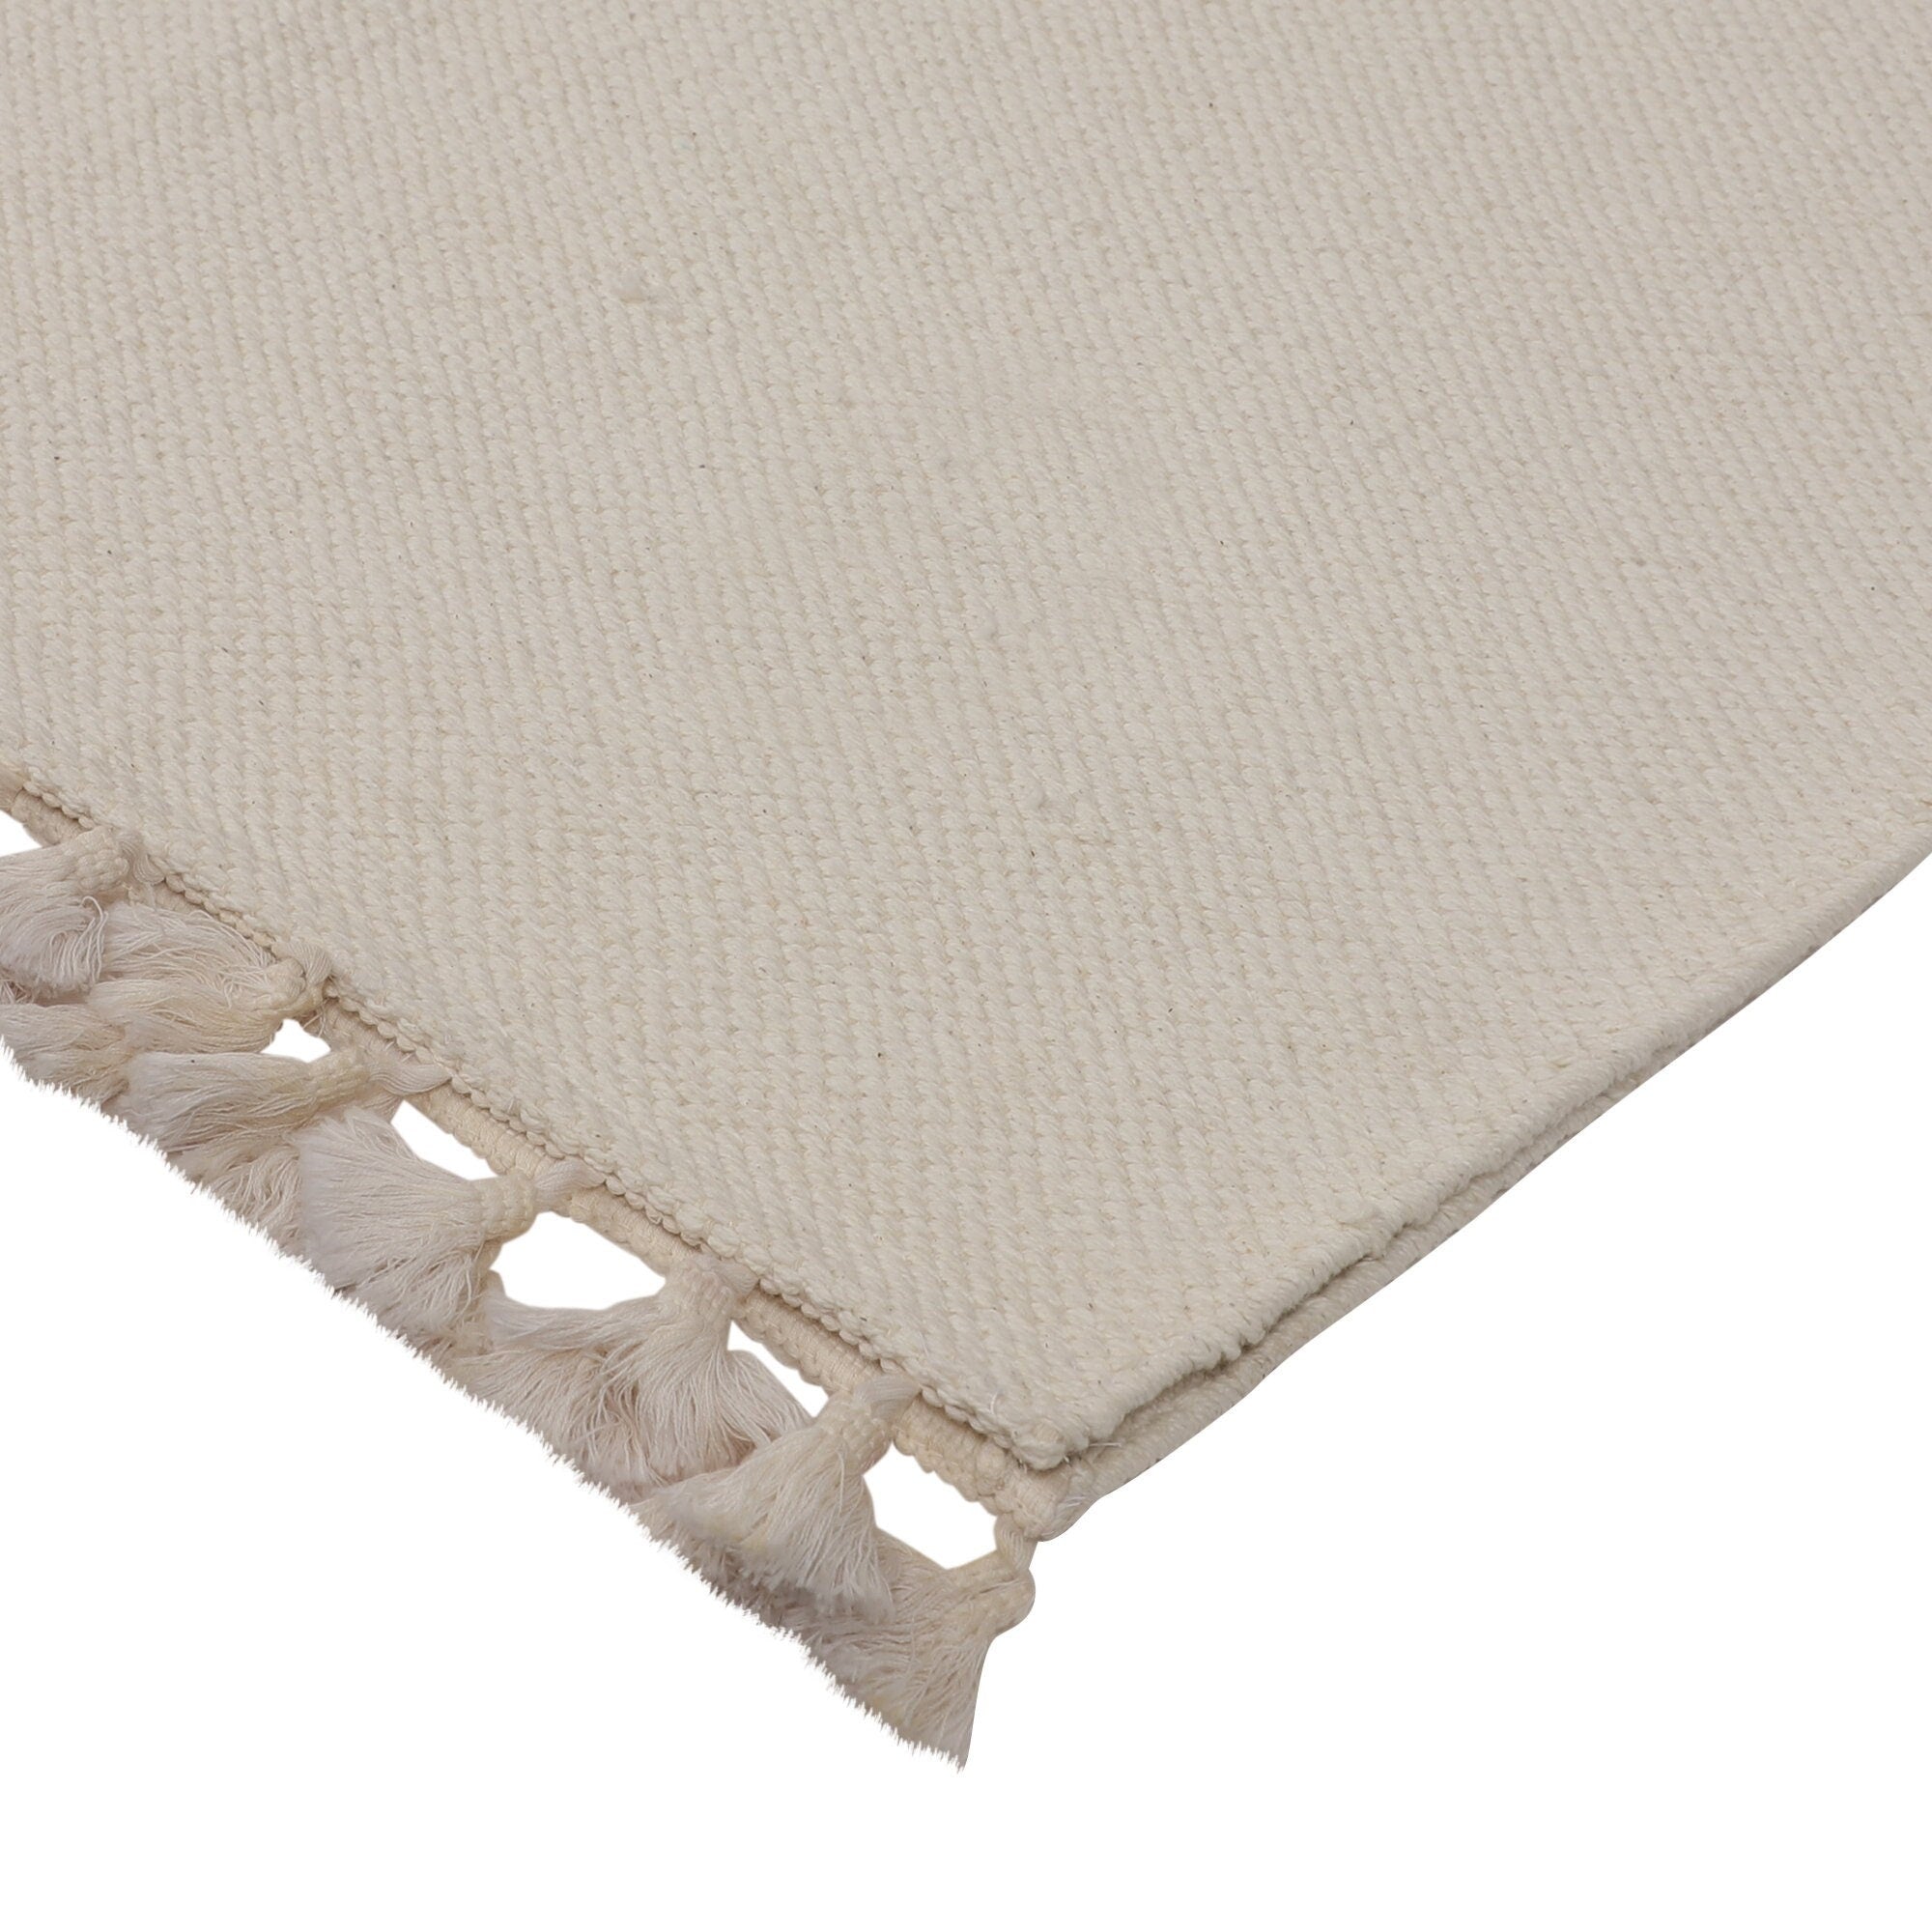 6 by 4 Feet Large Area Cotton Yoga Rug - Handwoven Natural White Cotton Rug, Organic White Ivory Cotton Rug - Cotton Carpet - Made in India